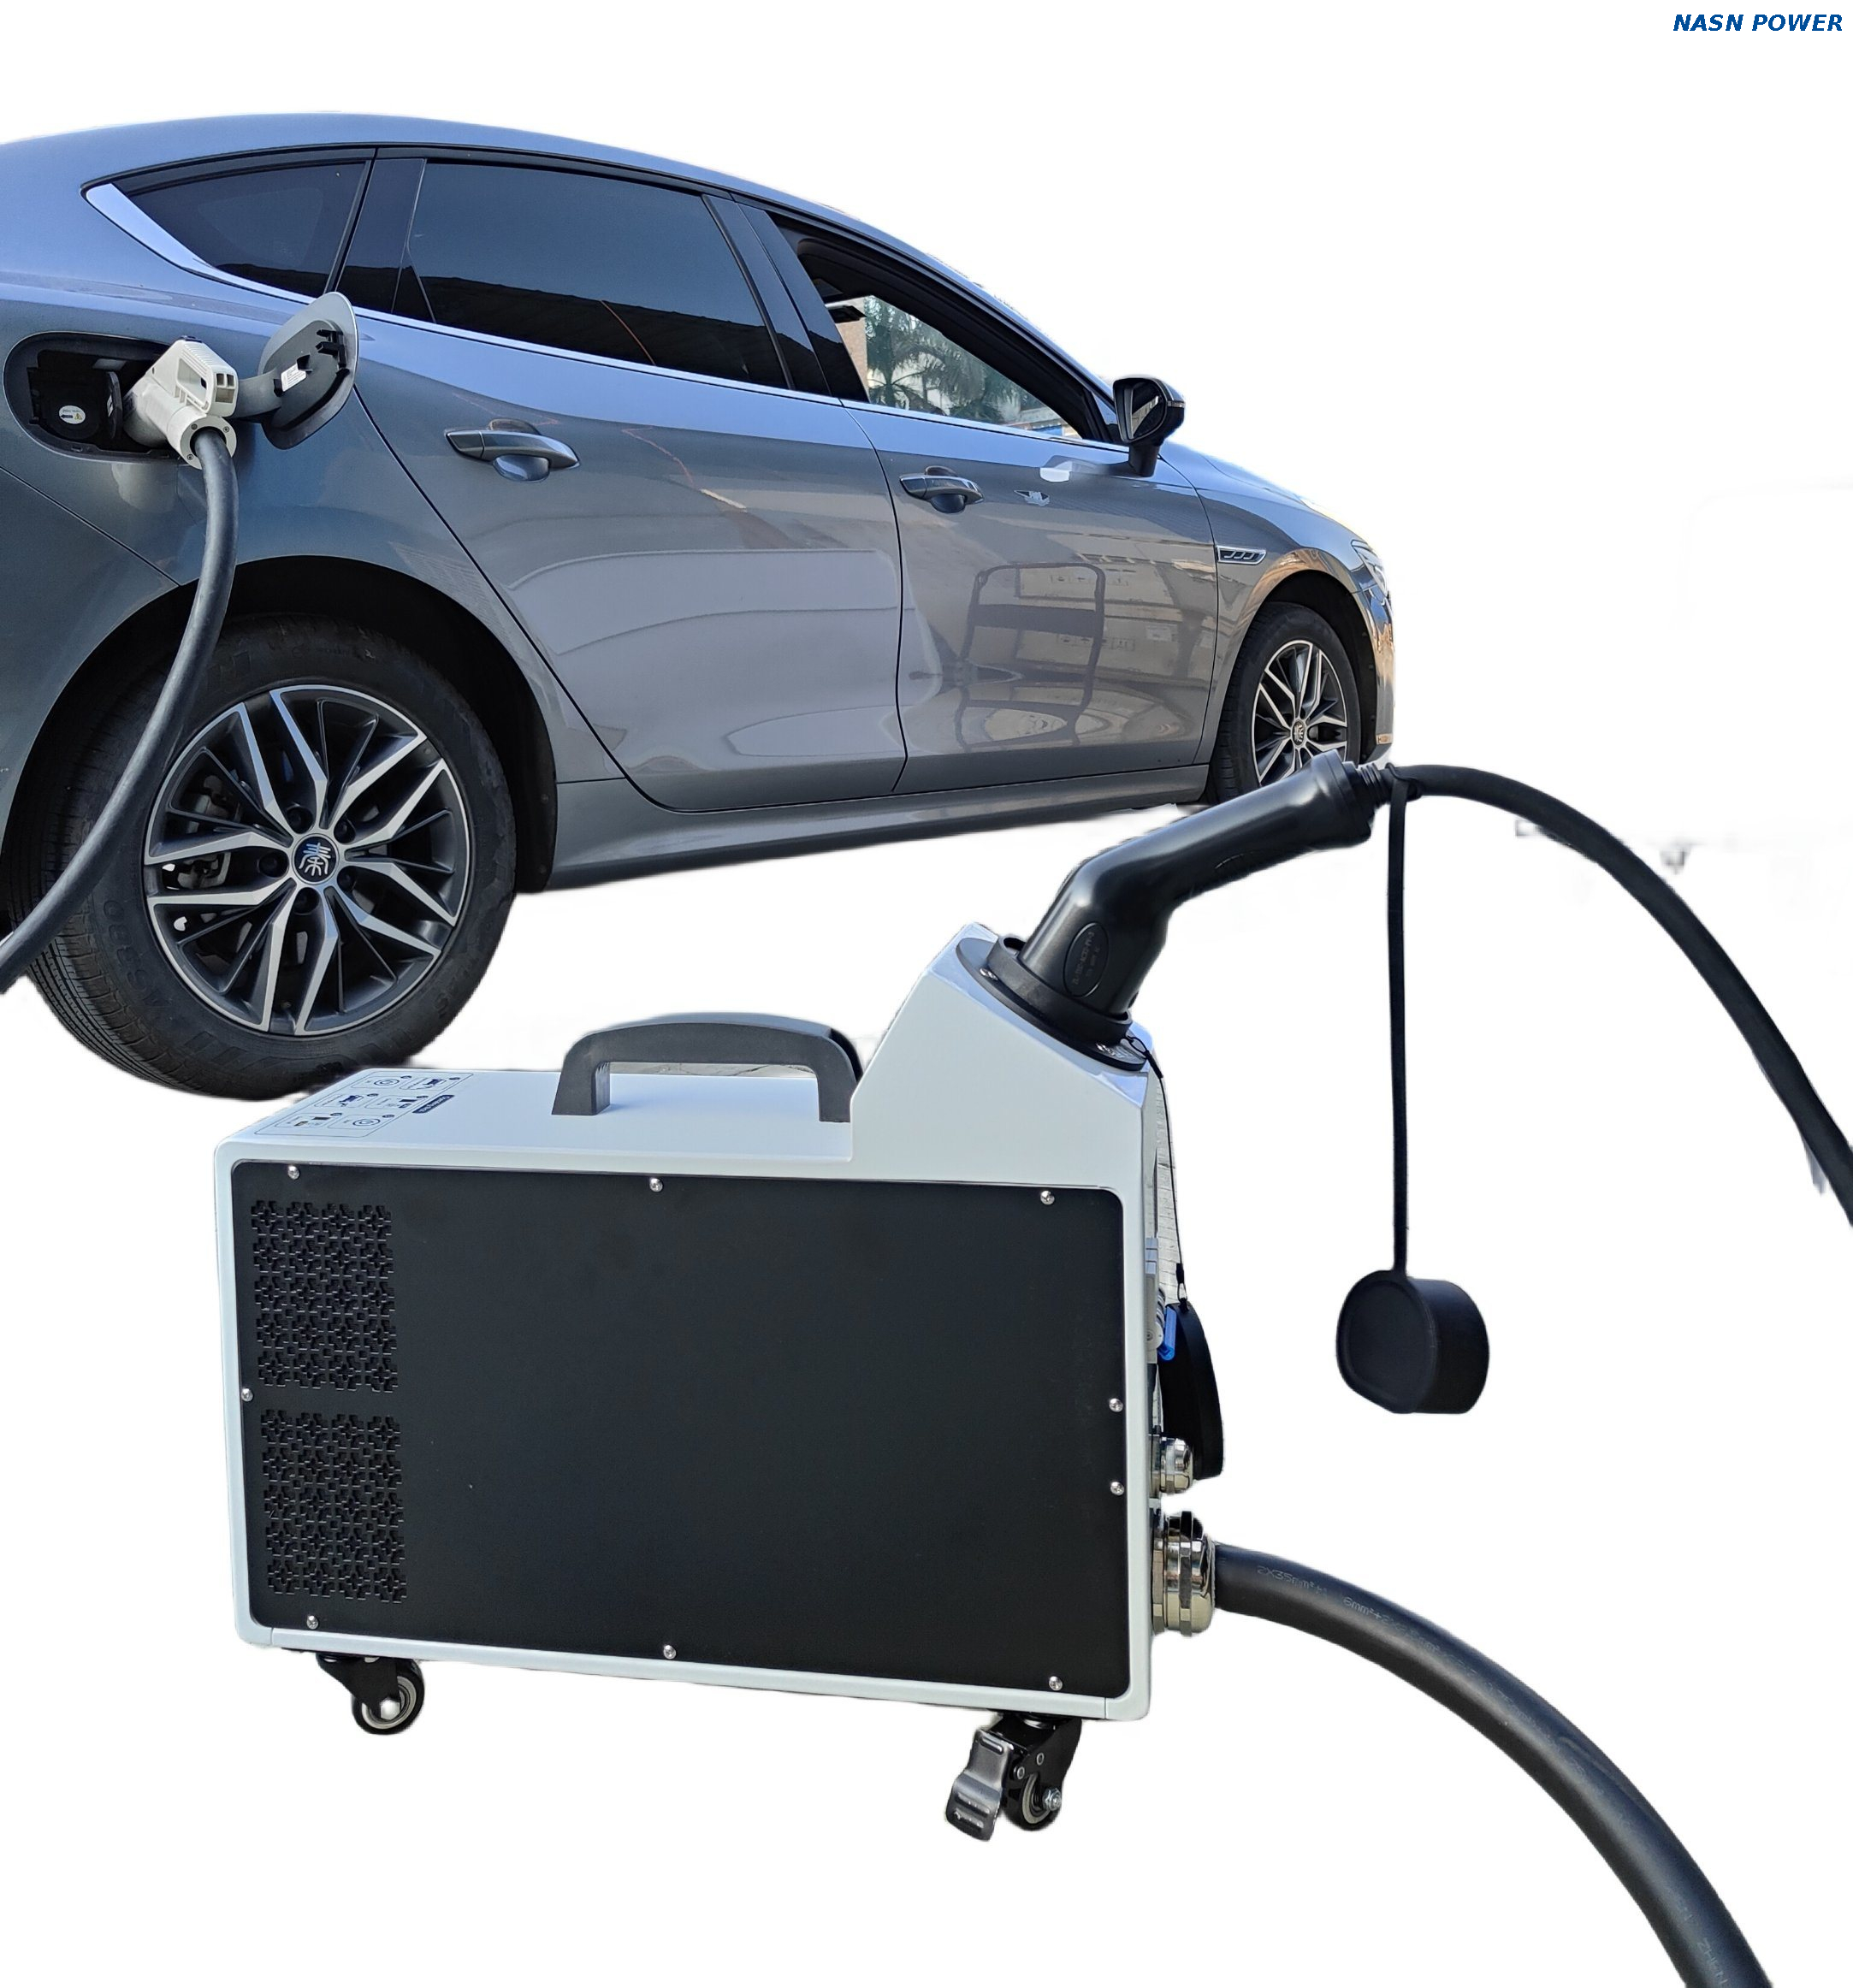 15kW Portable DC Fast EV Charger with type 2 input plug